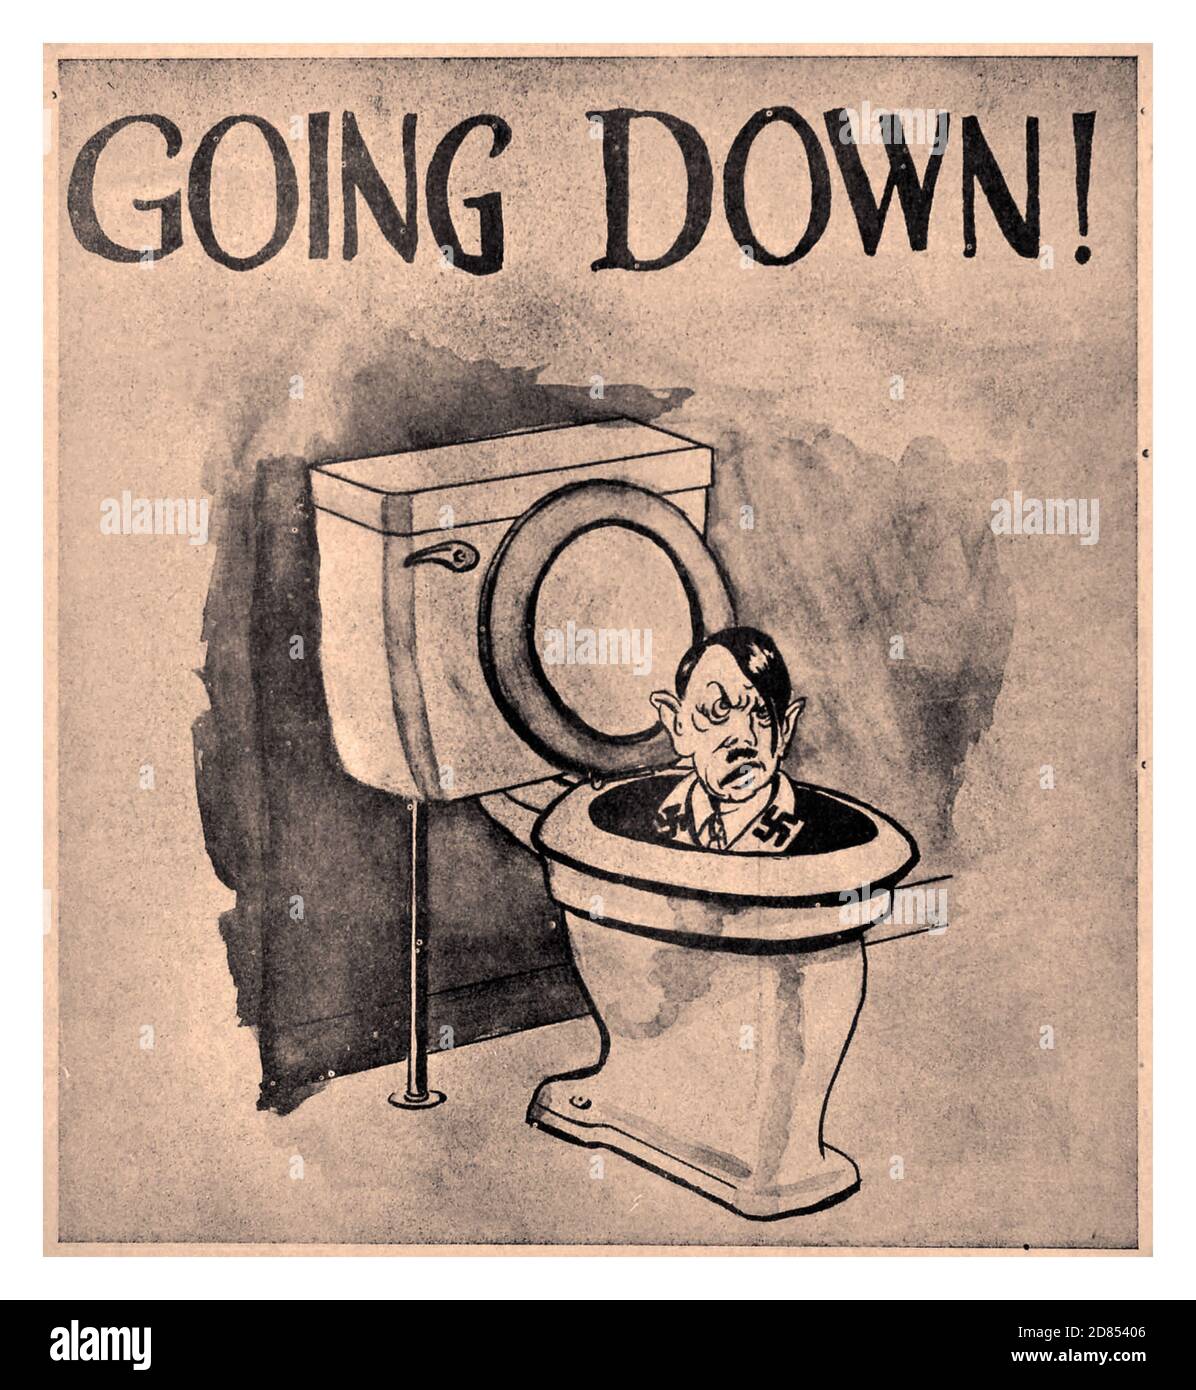 WW2 War cartoon Poster ‘Going Down’ with Adolf Hitler going down a lavatory wearing a swastika symbol.  vintage propaganda poster titled 'Going Down!', featuring a black and white drawing of Adolf Hitler's caricature emerging from a toilet seat. The poster was issued by Hobo news, an early 20th-century newspaper for homeless migrant workers. It was published in St. Louis, Missouri, and Cincinnati by the International Brotherhood Welfare Association (IBWA) and its founder James Eads How. Hobo  : USA, designer: Hobo News,  year of printing: 1940s Stock Photo